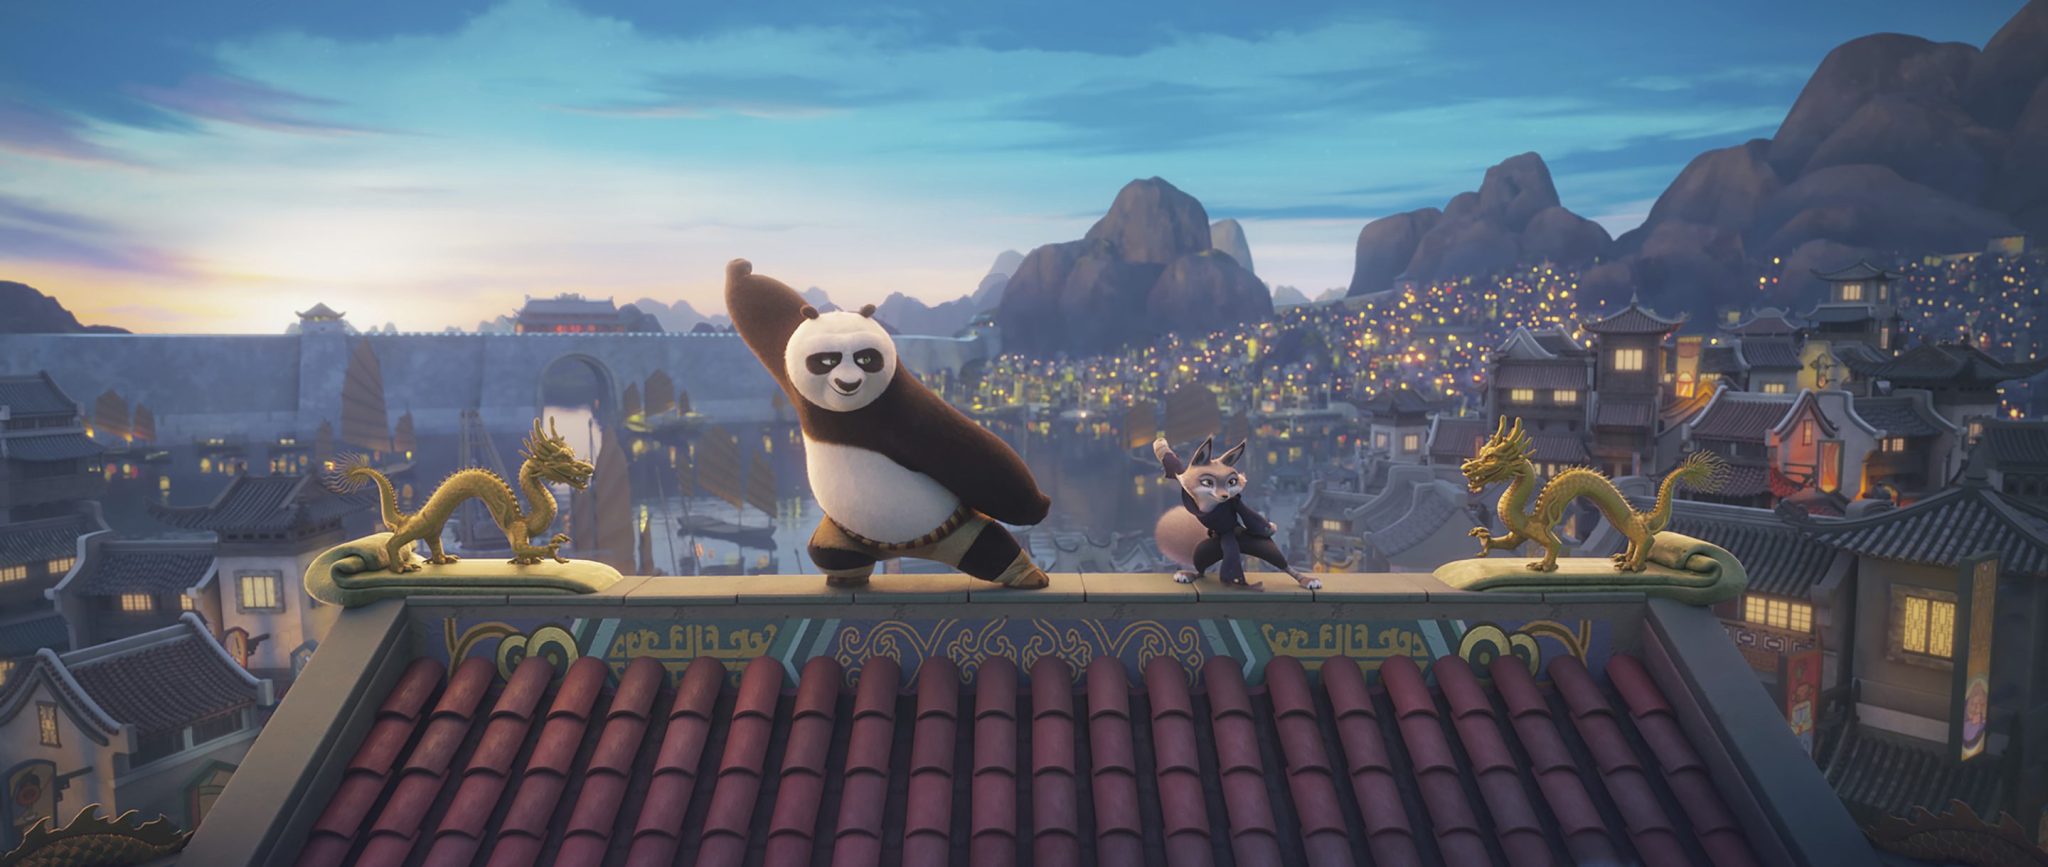 ‘Kung Fu Panda 4’ stays atop box office in second weekend